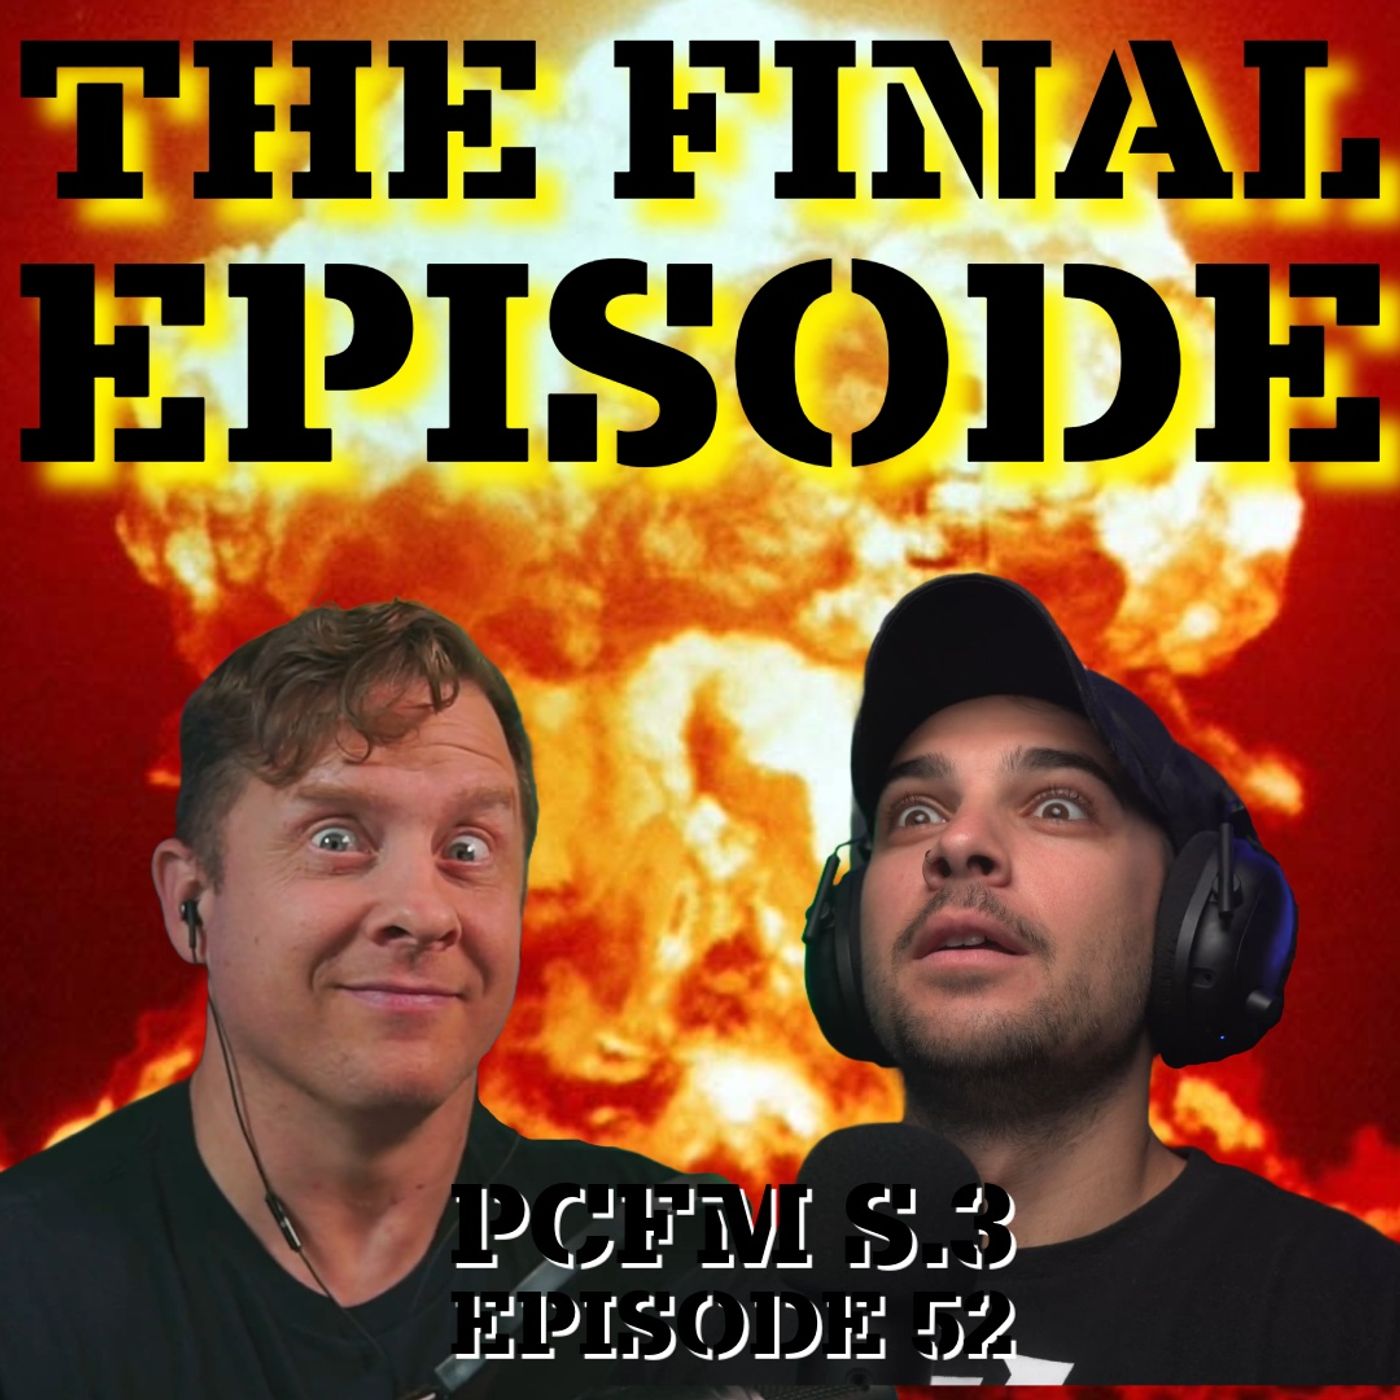 THE FINAL EPISODE